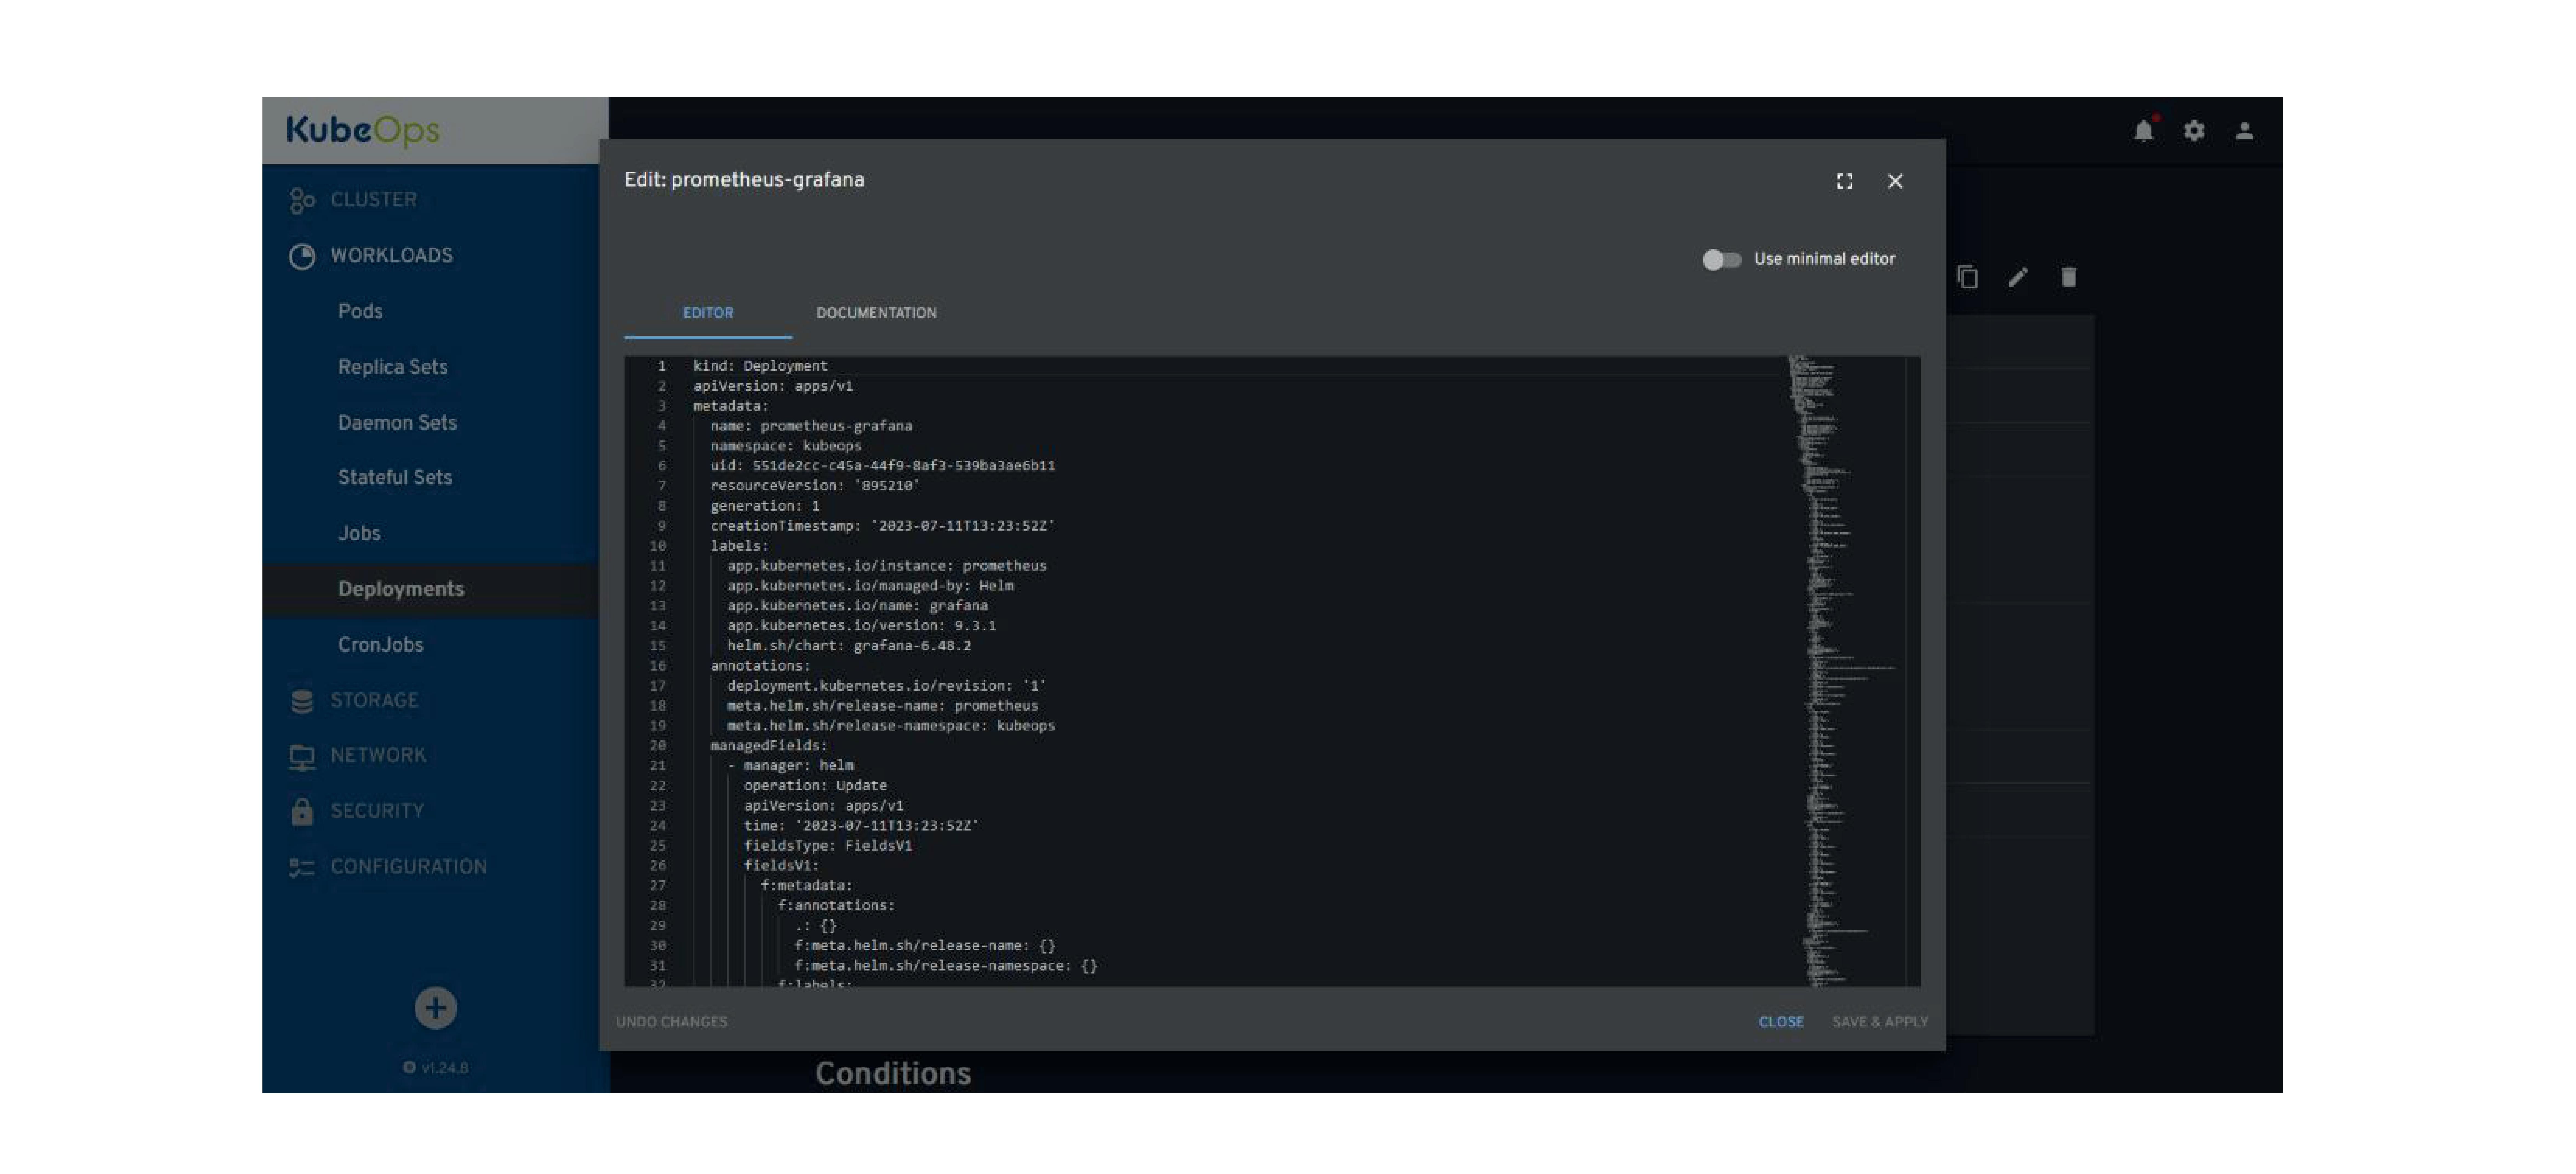 The image displays a KubeOps user interface screen for editing the deployment configuration of "prometheus-grafana". The left side shows a navigation bar with options for "Cluster", "Workloads", which includes "Pods", "Replica Sets", "Daemon Sets", "Stateful Sets", "Jobs", "Deployments", "CronJobs", and sections for "Storage", "Network", "Security", and "Configuration". The main panel is an editor window with YAML code detailing the deployment settings such as the kind, API version, metadata, labels, and annotations specific to Helm management. The YAML code includes sections for metadata like name, namespace, labels, and annotations including release names and namespaces managed by Helm. The interface has a minimalist, dark design with options to "Close", "Save & Apply", and switch to a "minimal editor".